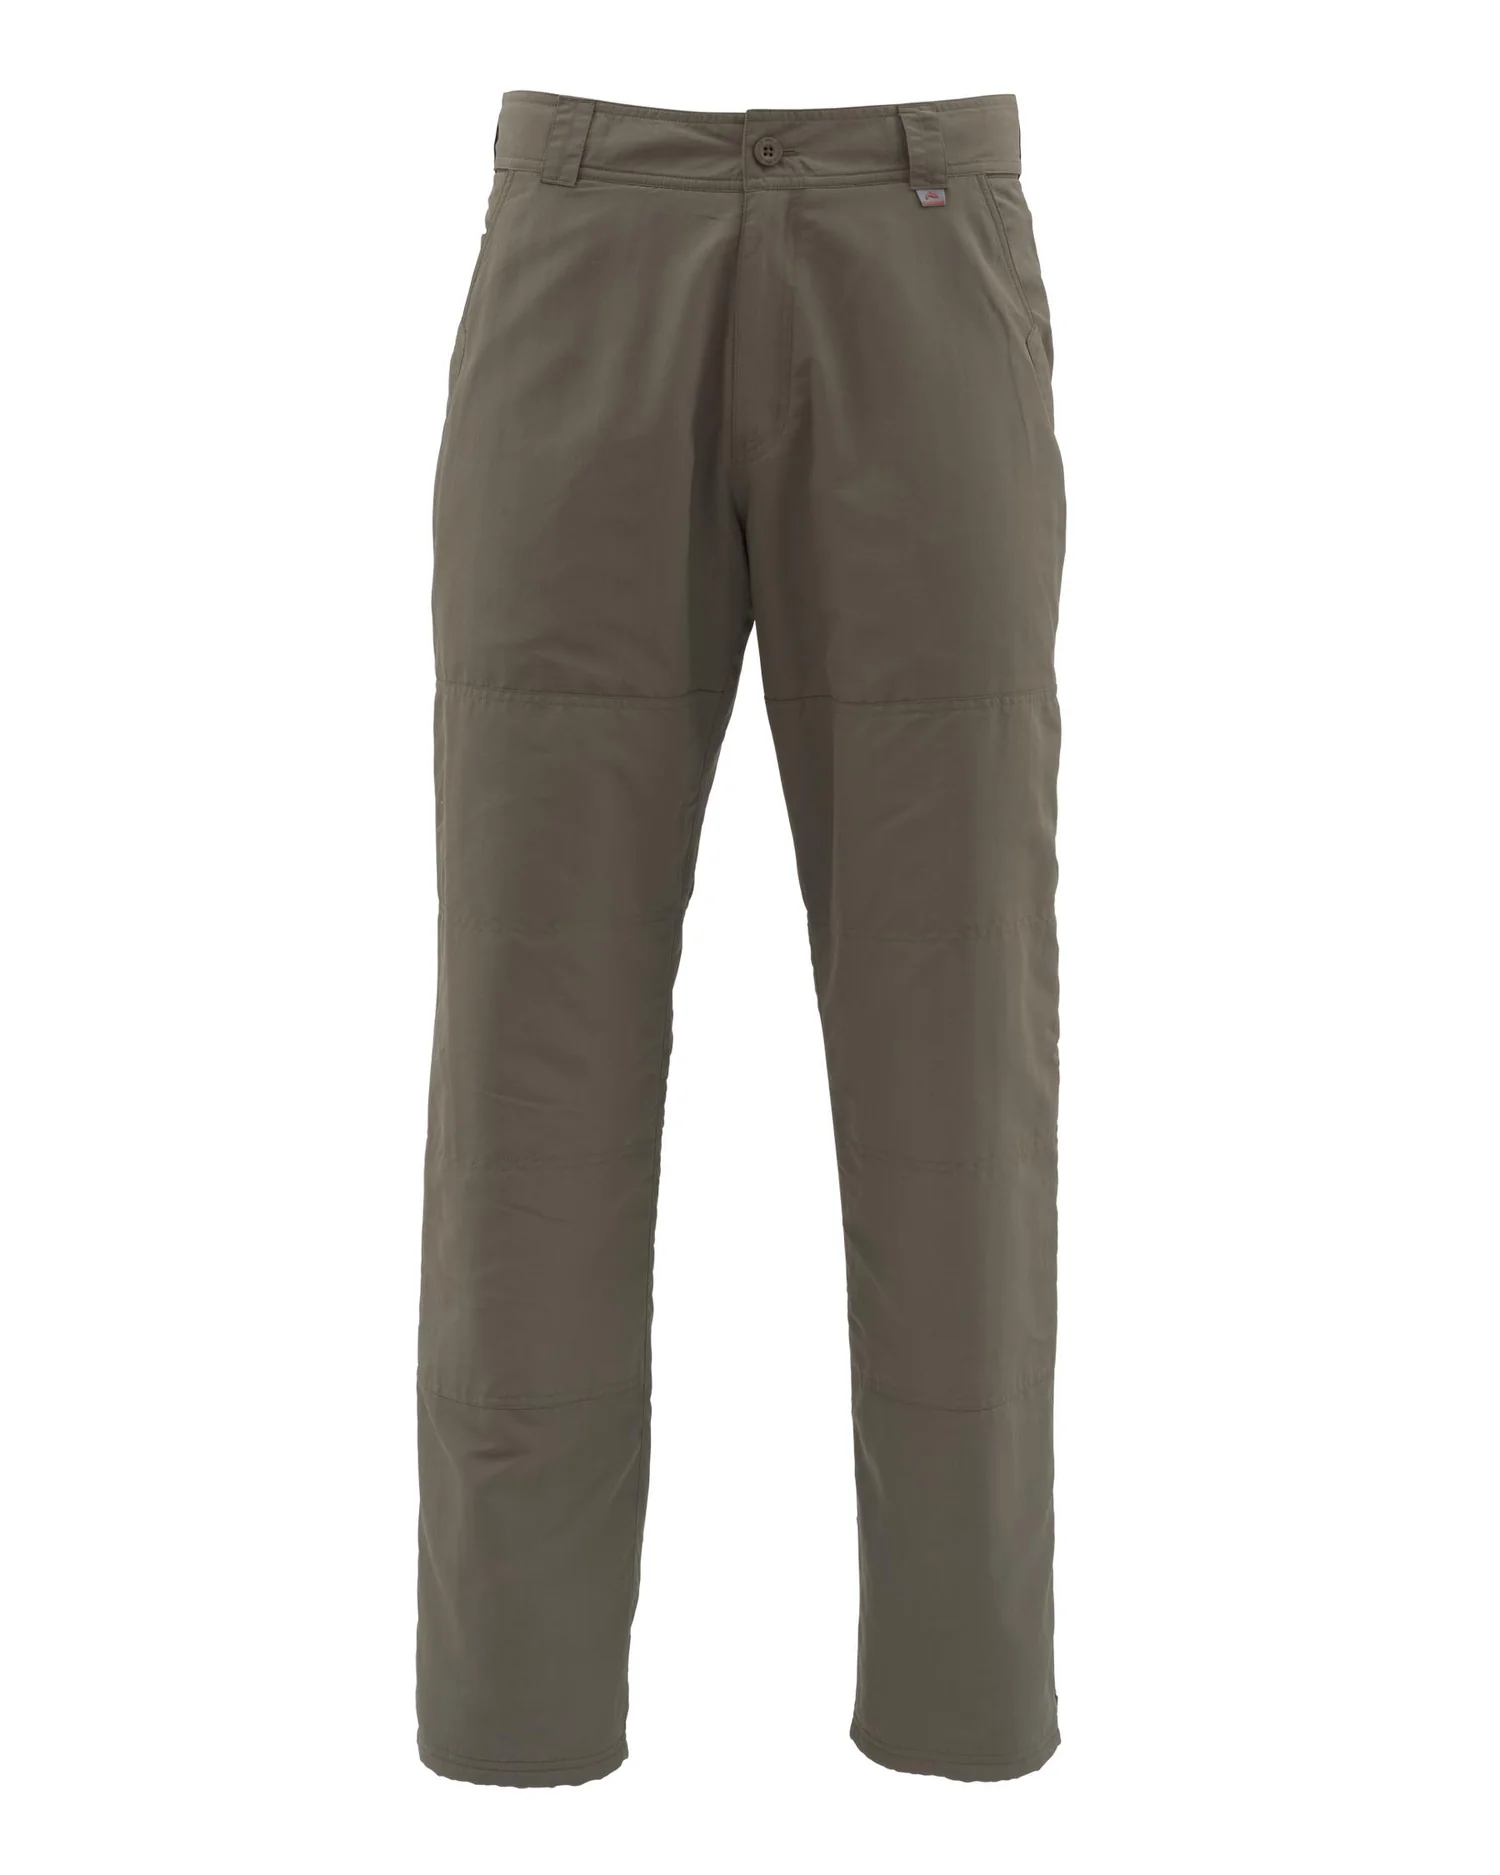 Coldweather Pants - Rivers & Glen Trading Co.